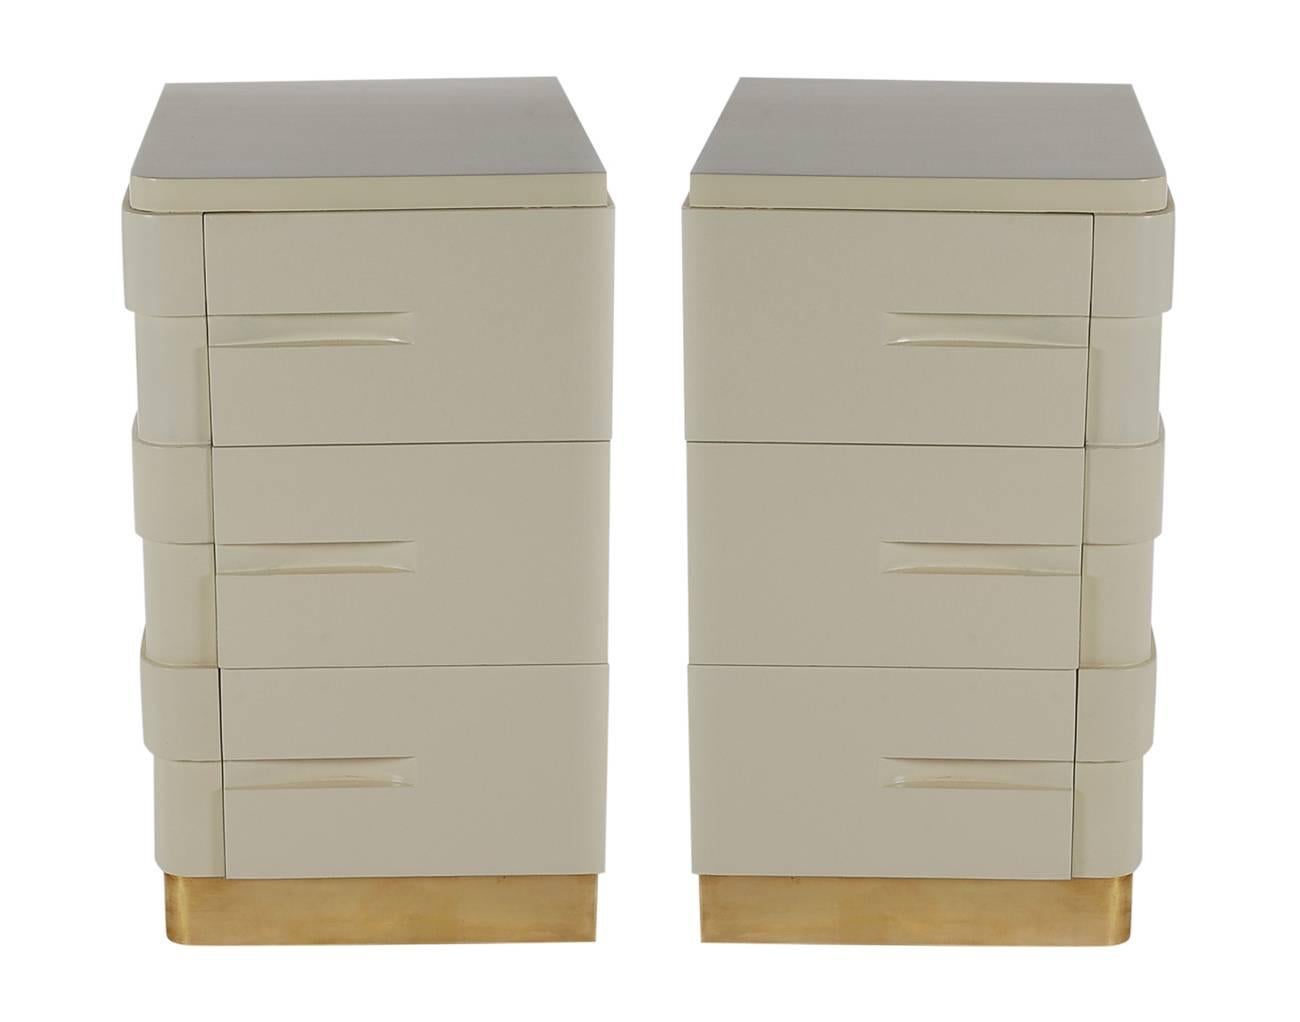 A handsome pair of American Art Deco nightstands, circa 1940s. They feature solid wood construction, newer bone white lacquer, and brass platform bottoms. 

In the style of: Gilbert Rohde, James Mont and Paul Frankl.